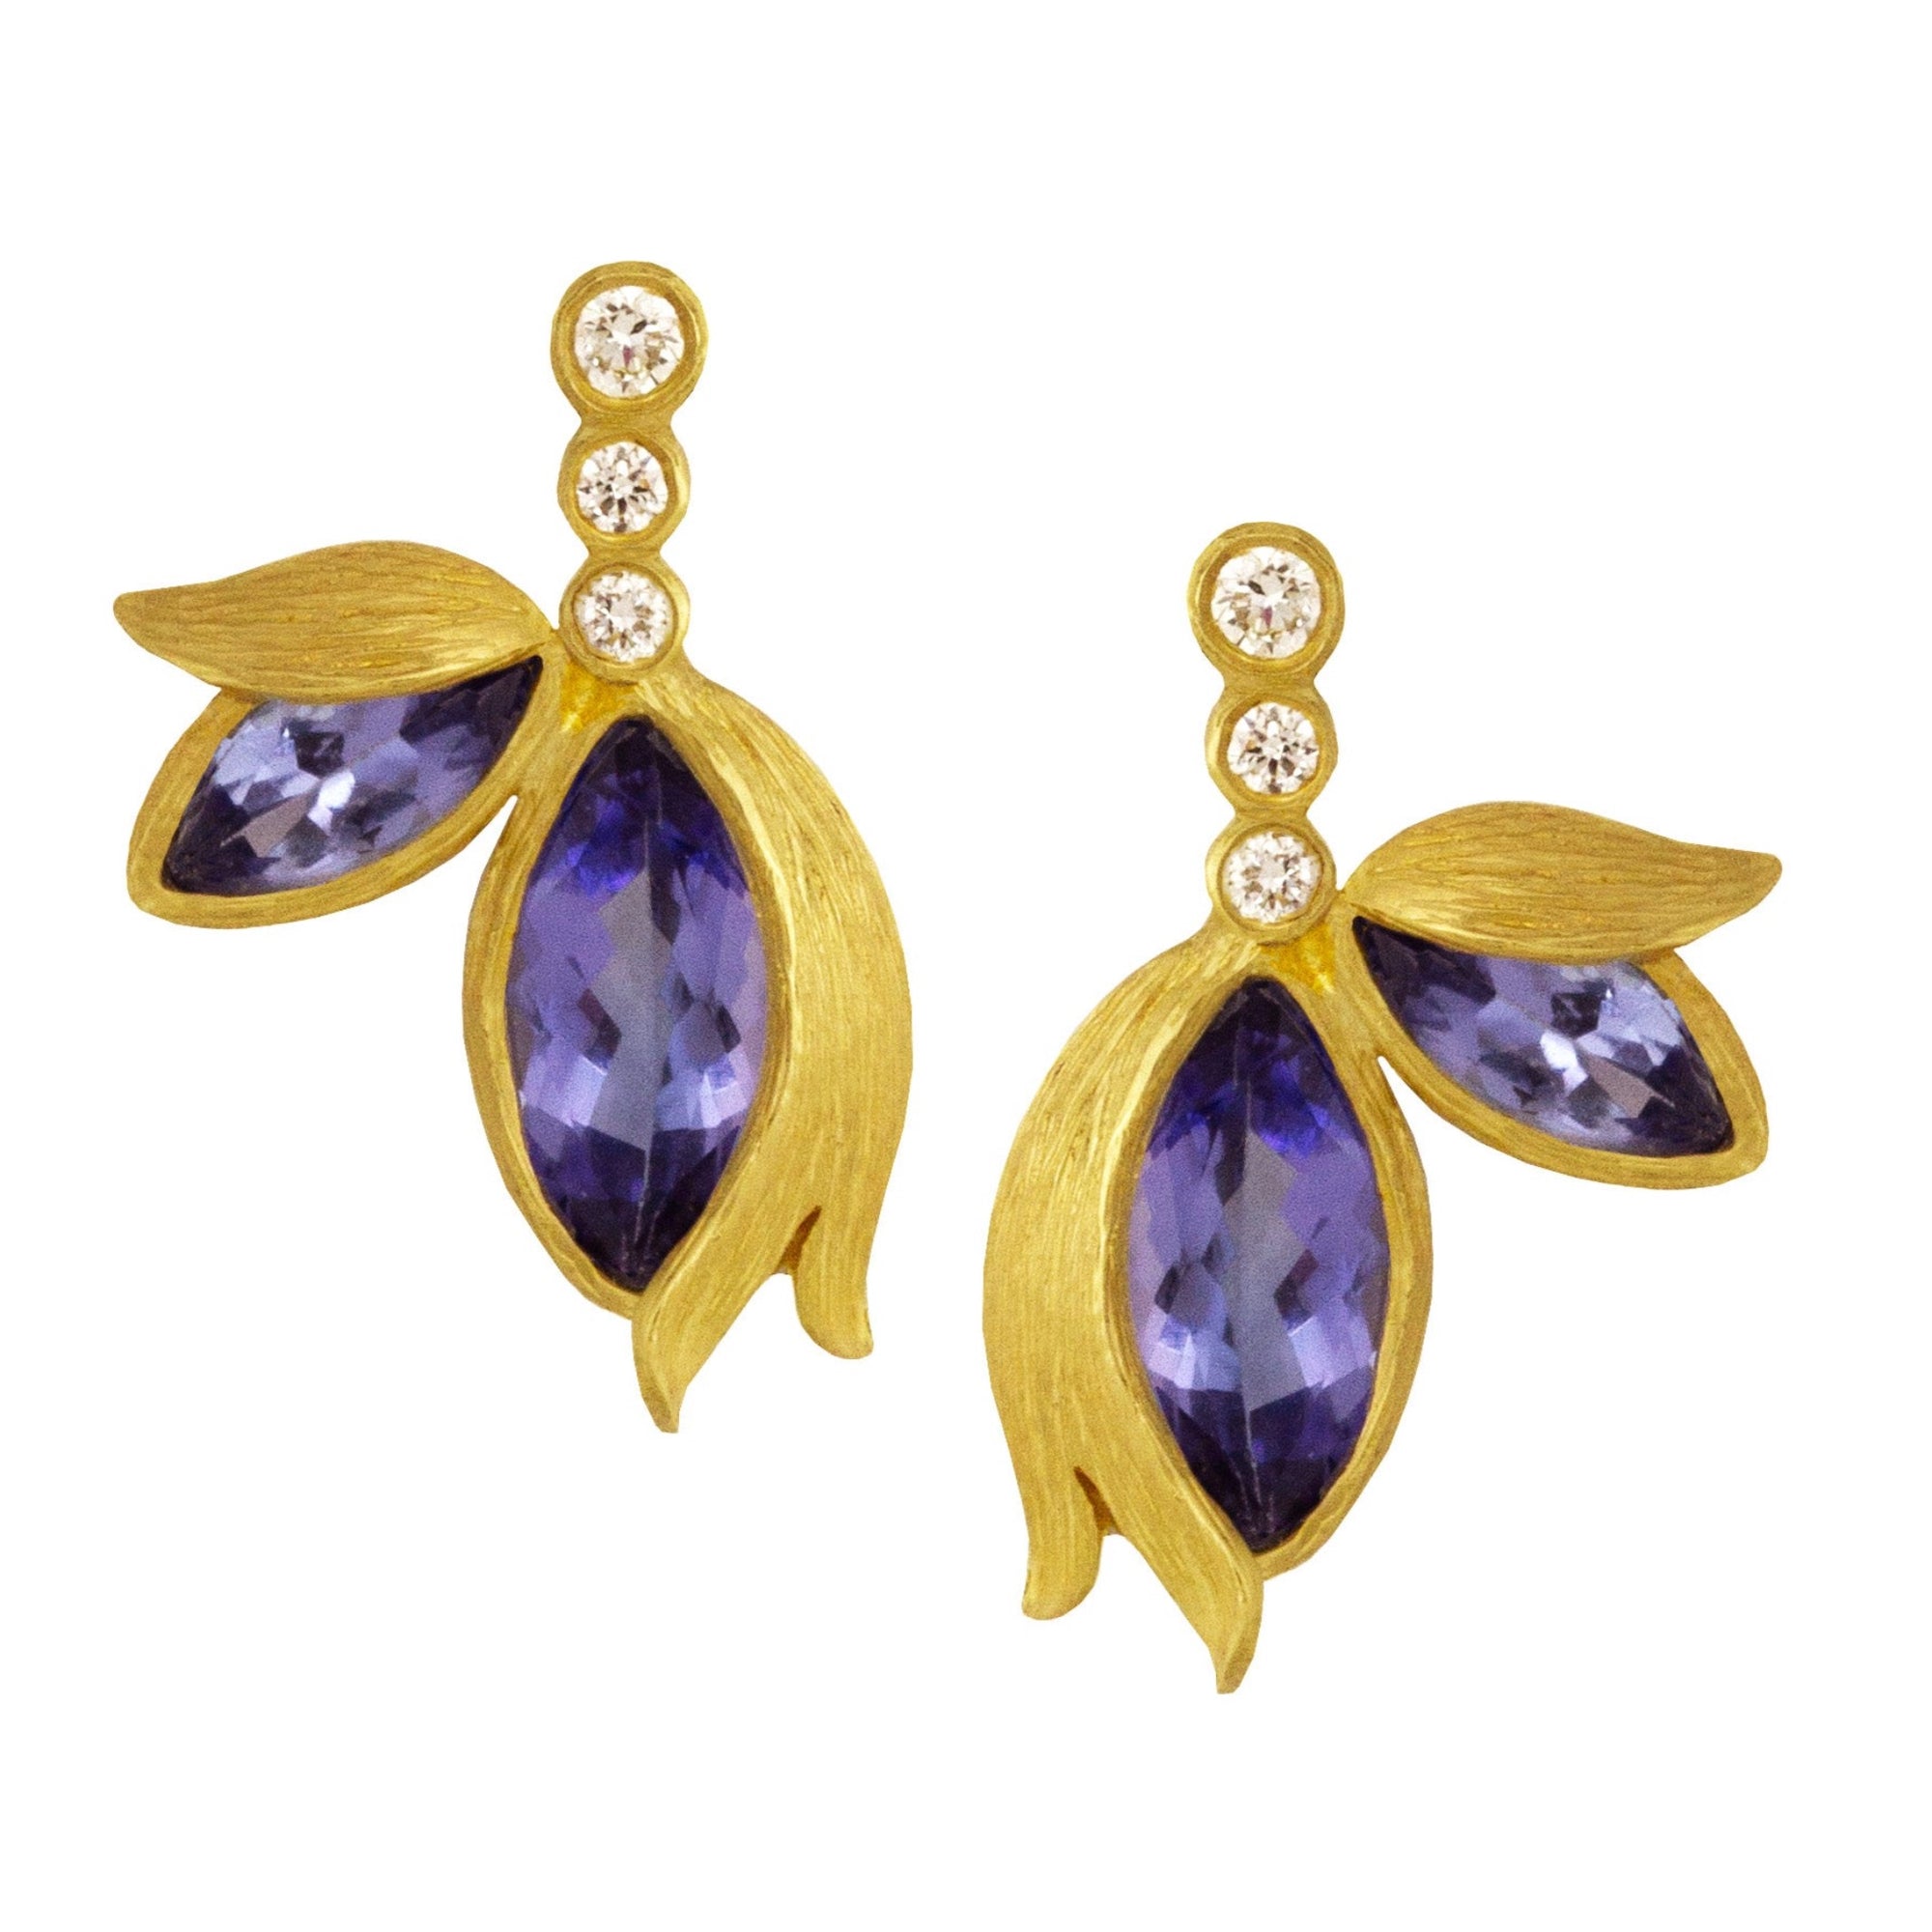 Tanzanite Double Petal Studs by Laurie Kaiser available at Talisman Collection Fine Jewelers in El Dorado Hills, CA and online. Delicately crafted with marquise-cut faceted tanzanites, 0.08 cts of white brilliant diamonds, and 18k yellow gold, the Tanzanite Double Petal Stud Earrings are both lovely and feminine.They will add the perfect little touch of luxury. 